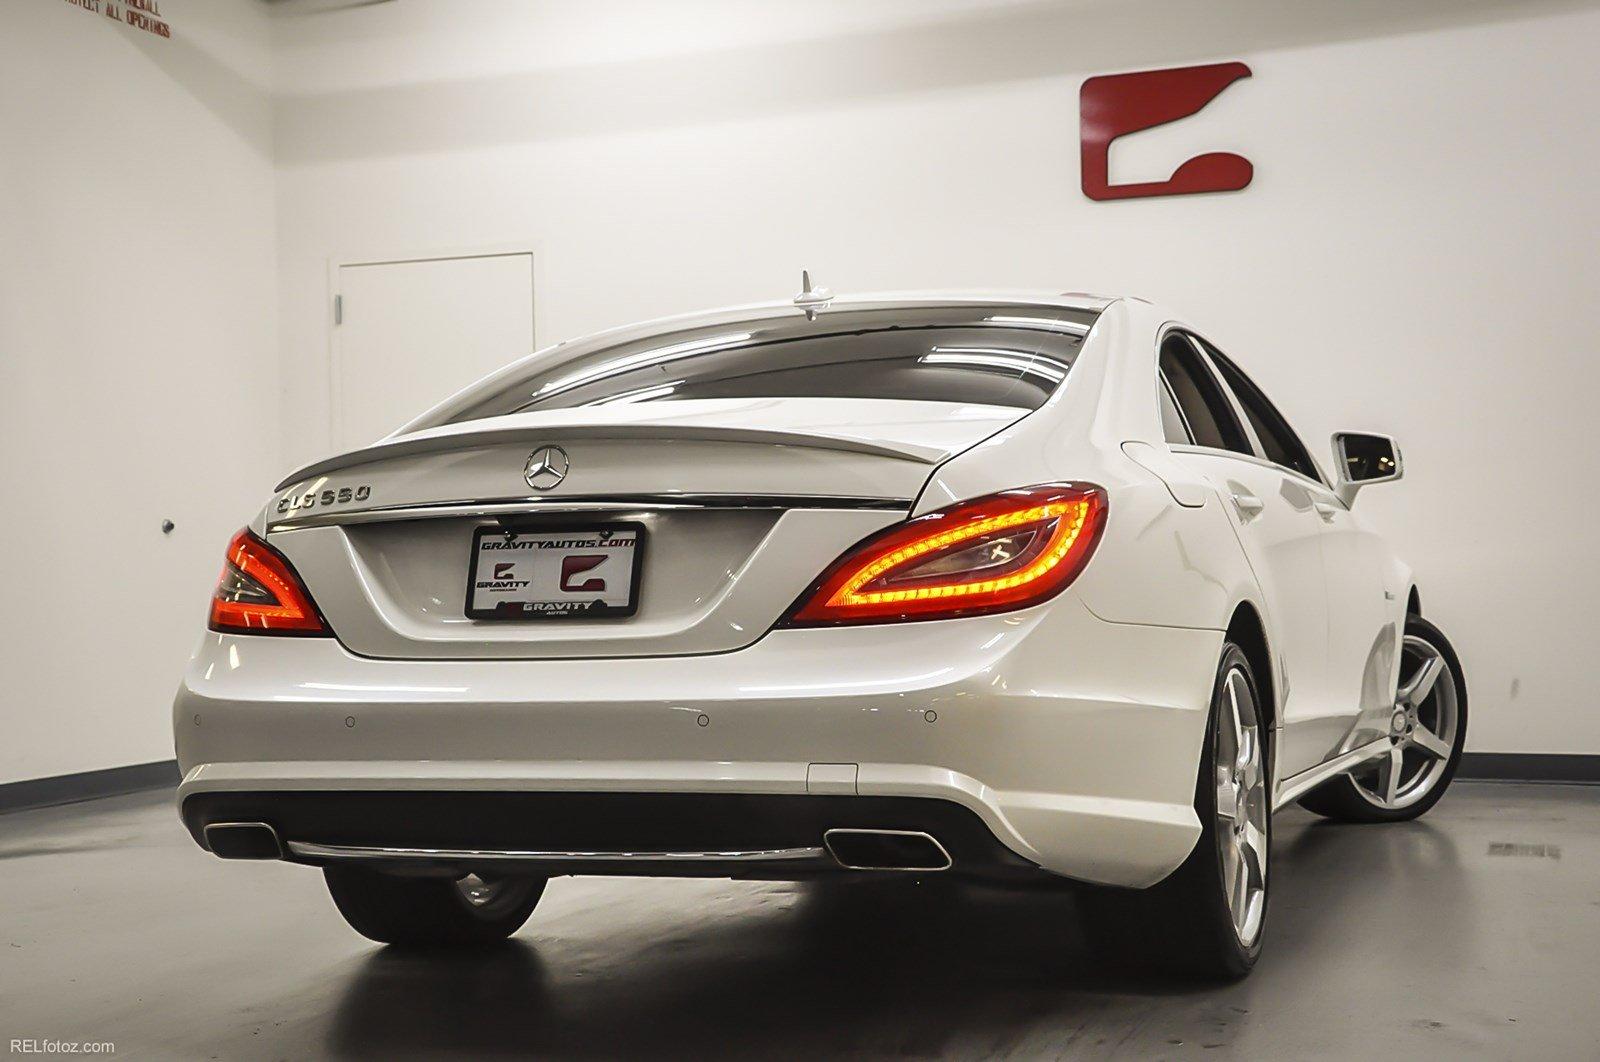 Used 2012 Mercedes-Benz CLS-Class CLS 550 for sale Sold at Gravity Autos Marietta in Marietta GA 30060 4